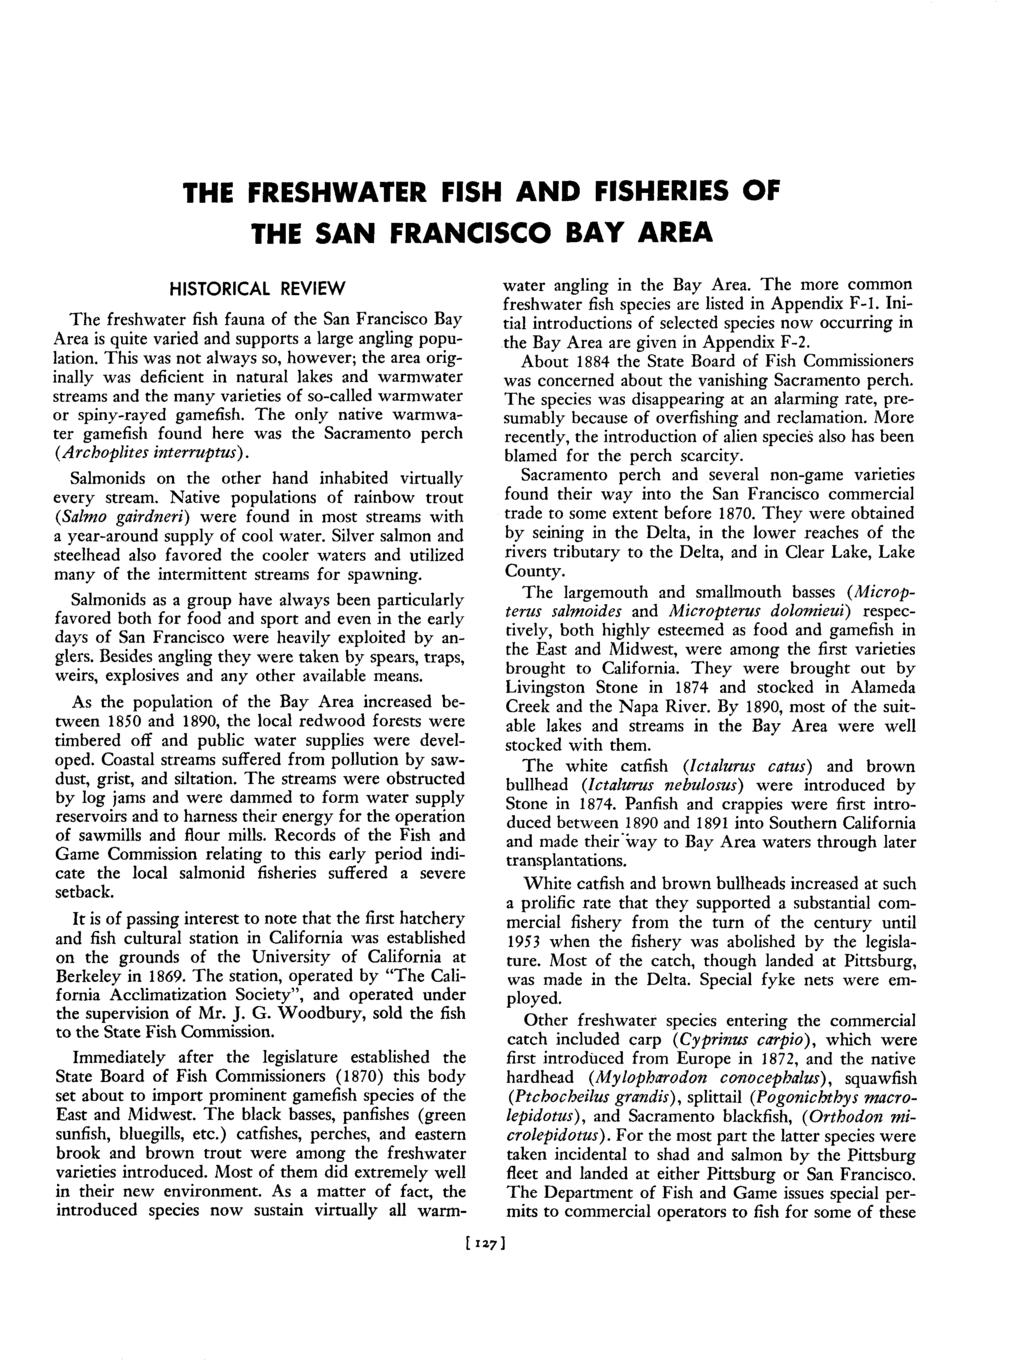 THE FRESHWATER FISH AND FISHERIES OF THE SAN FRANCISCO BAY AREA HISTORICAL REVIEW The freshwater fish fauna of the San Francisco Bay Area is quite varied and supports a large angling population.